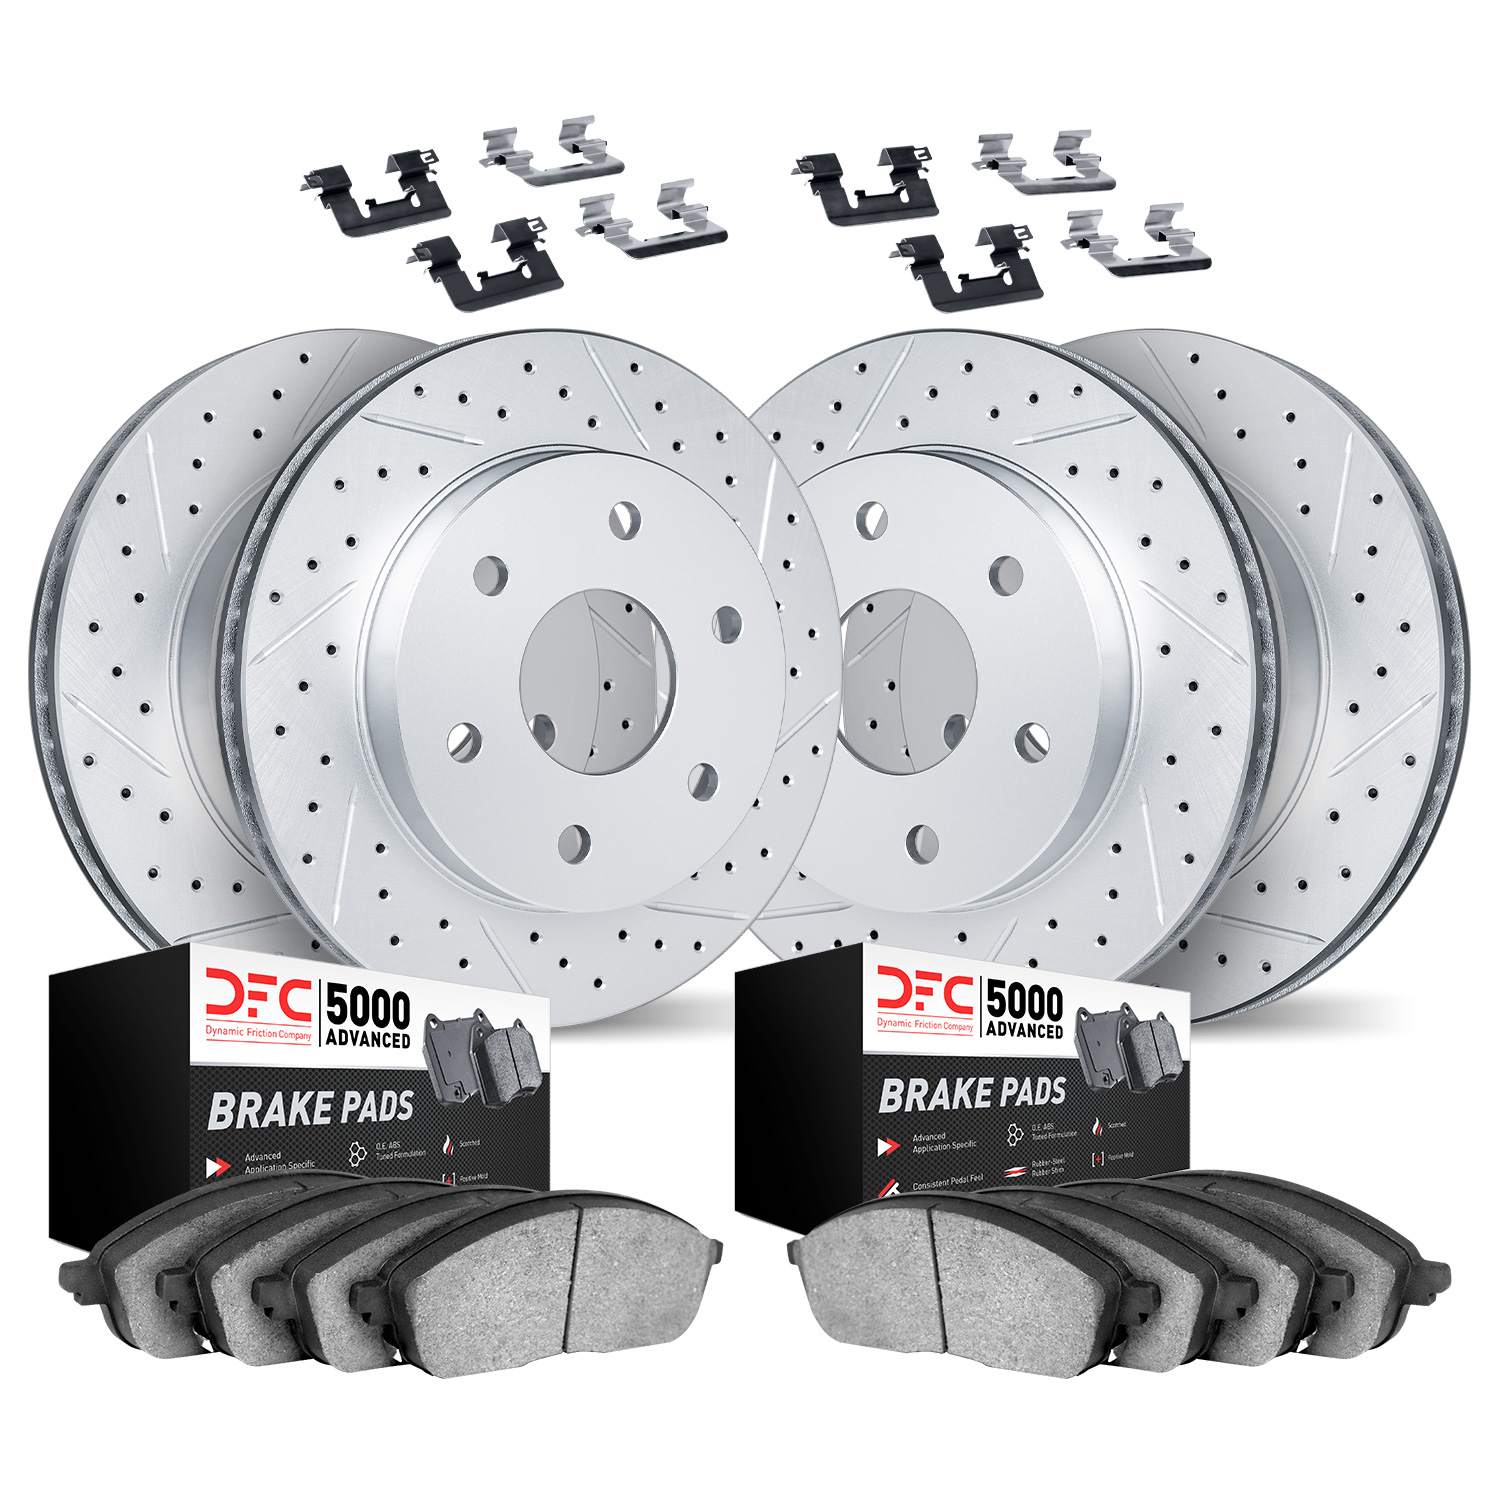 2514-48038 Geoperformance Drilled/Slotted Rotors w/5000 Advanced Brake Pads Kit & Hardware, 2017-2020 GM, Position: Front and Re